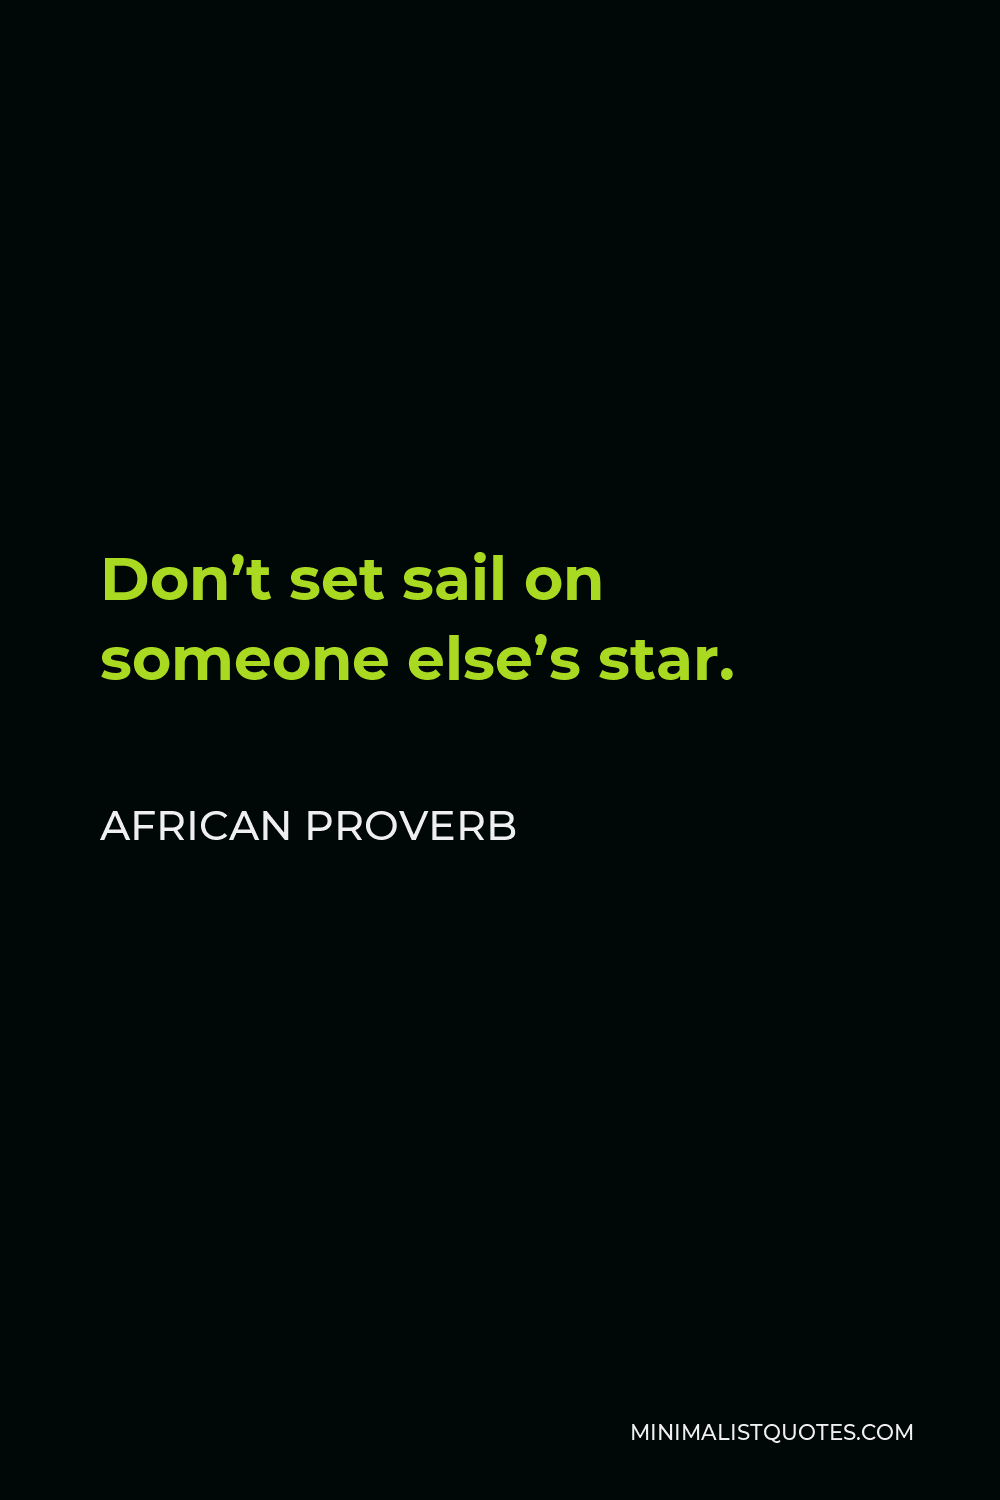 African Proverb Quote - Don’t set sail on someone else’s star.